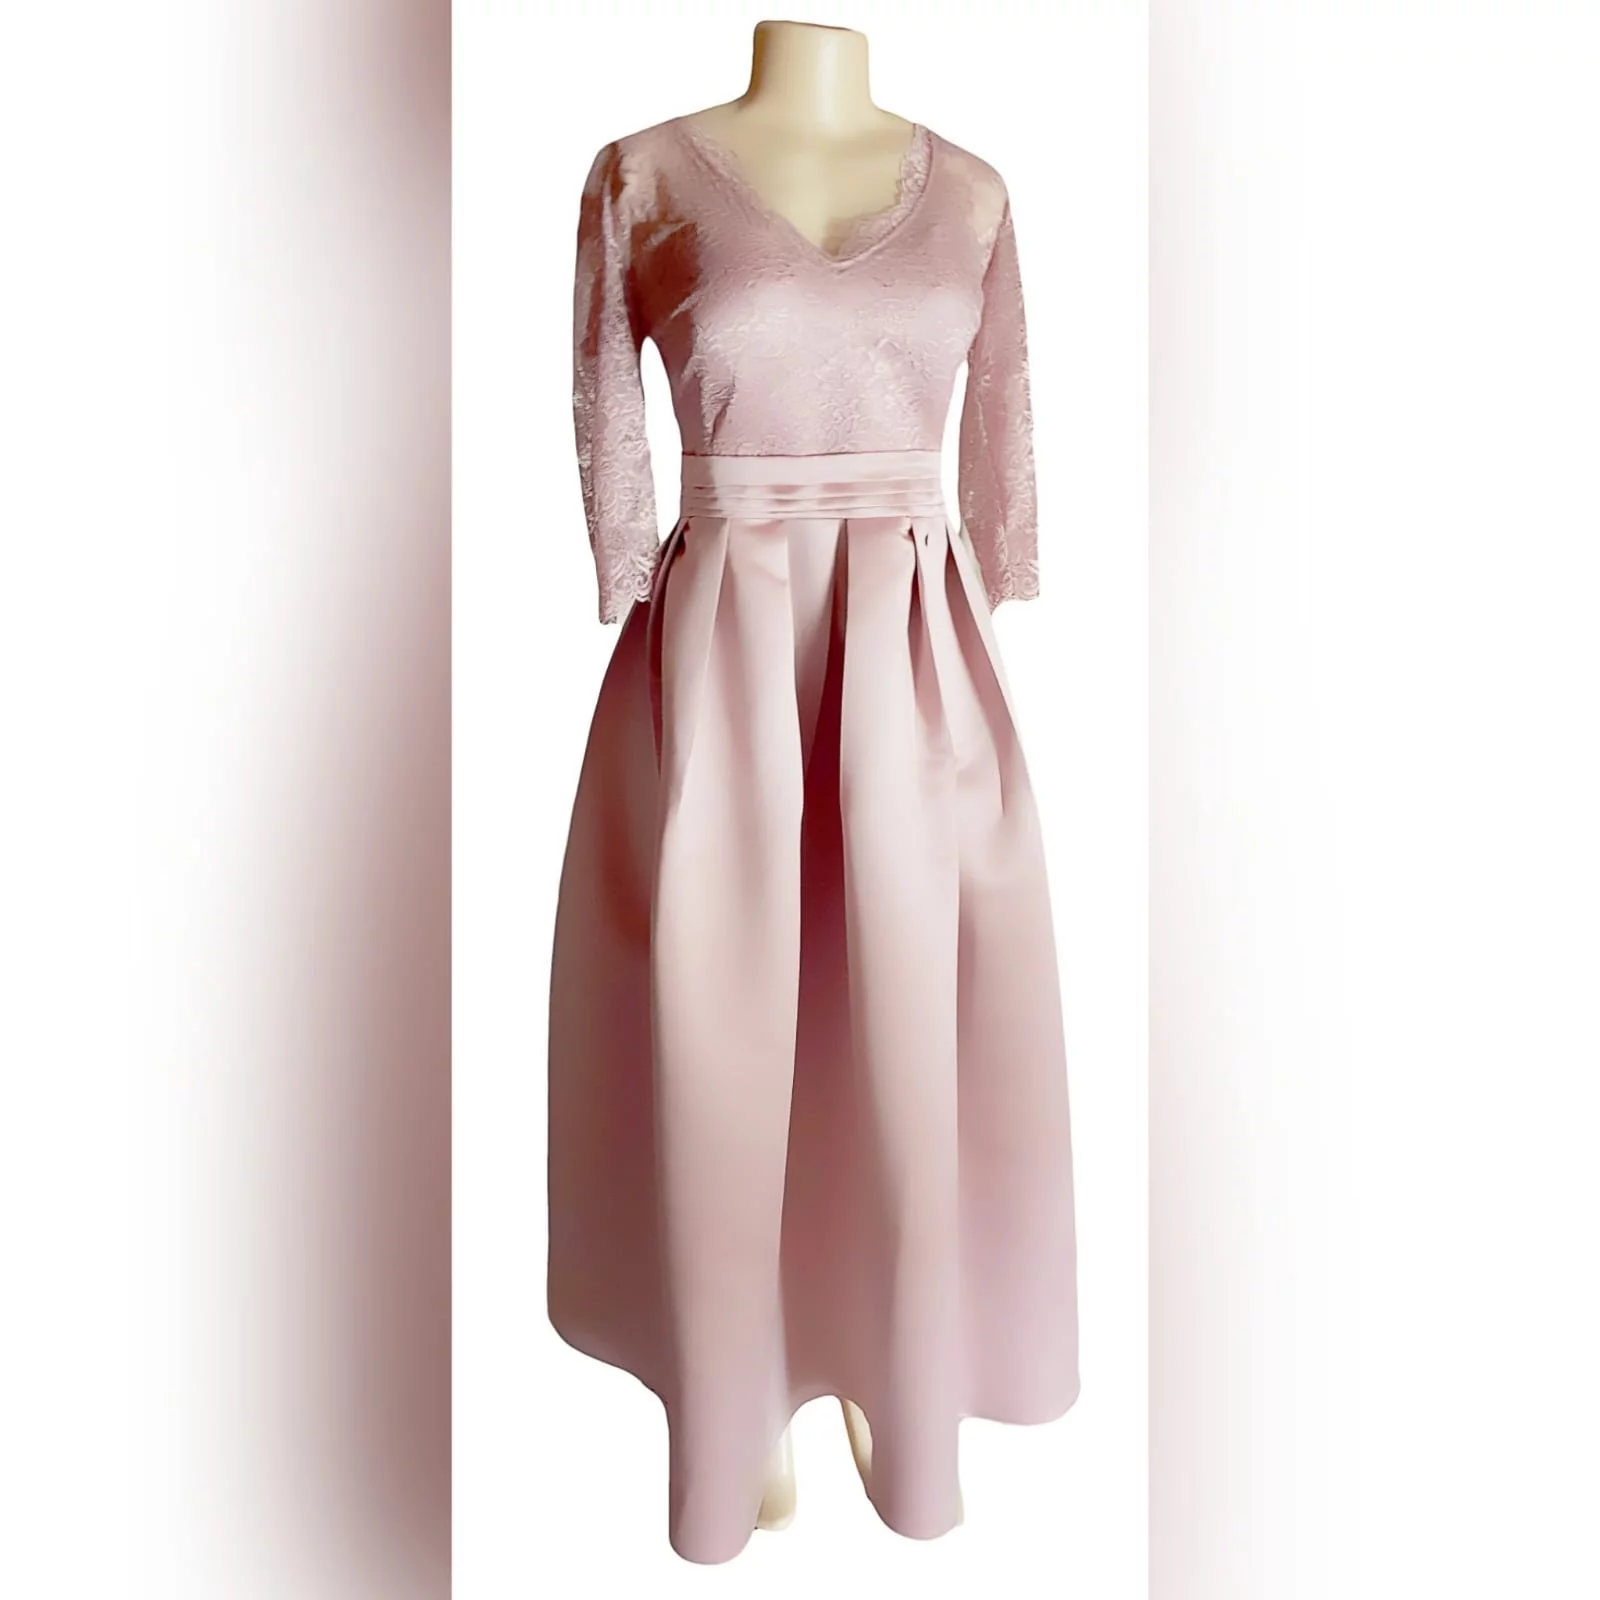 Formal evening dress in dusty pink 3 this dress was created for a wedding ceremony. A formal evening dress in dusty pink. With a lace bodice and 3/4 lace sleeves. With a v neckline. Bottom in a satin, pleated, with a pleated belt and pockets.